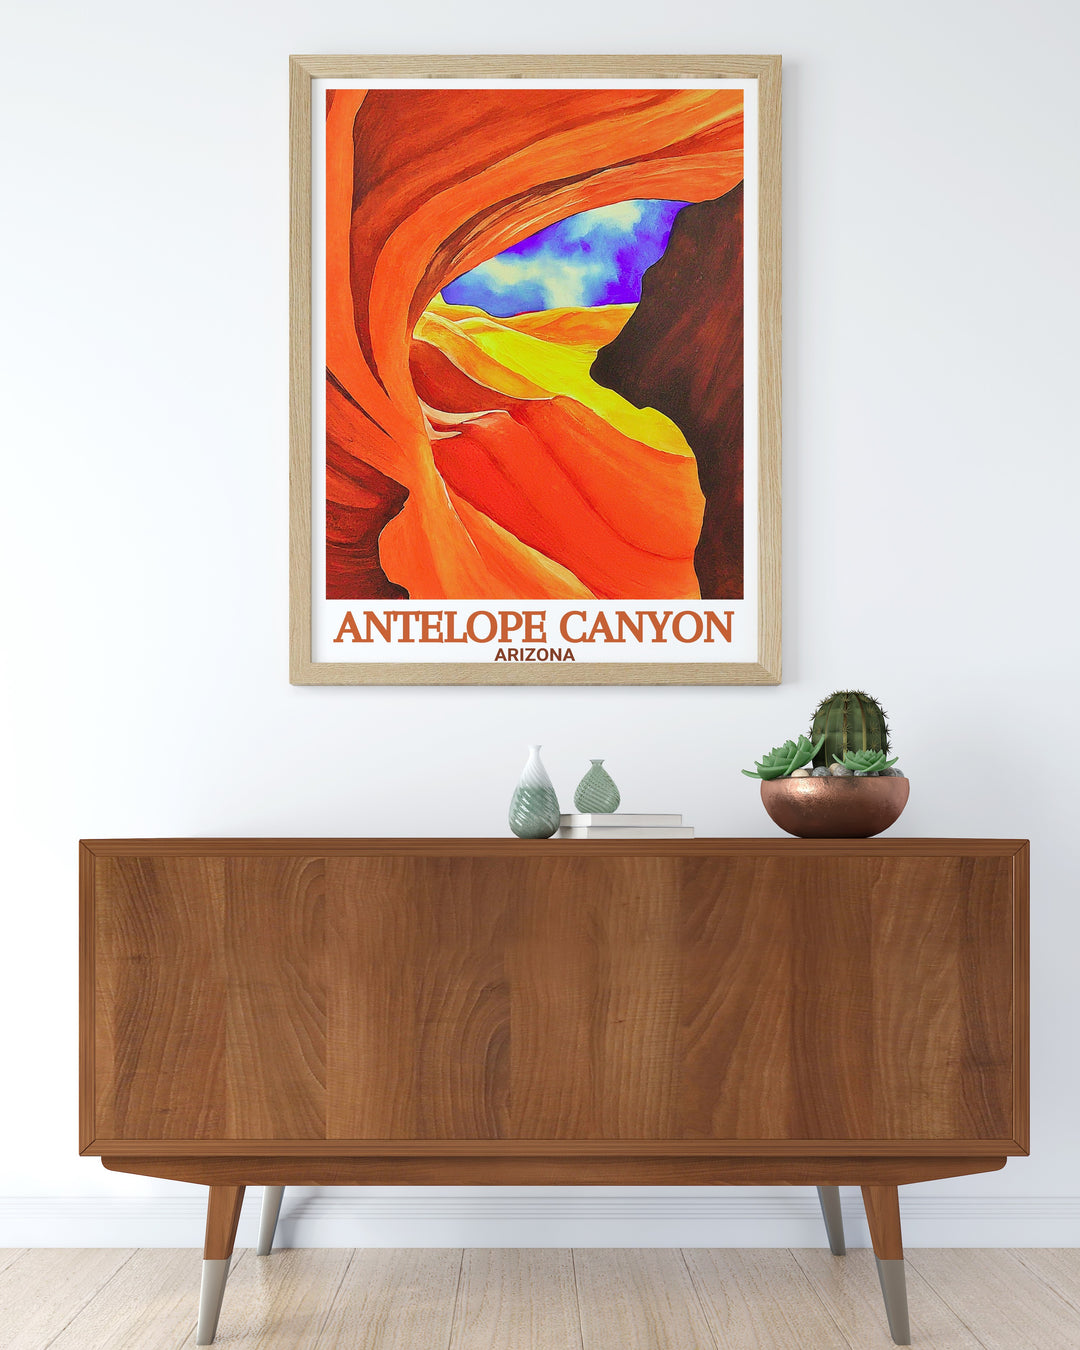 Arizona wall art highlighting the breathtaking scenery of Antelope Canyon with its swirling patterns and dynamic lighting effects a must have for fans of Arizona travel art and nature inspired designs.